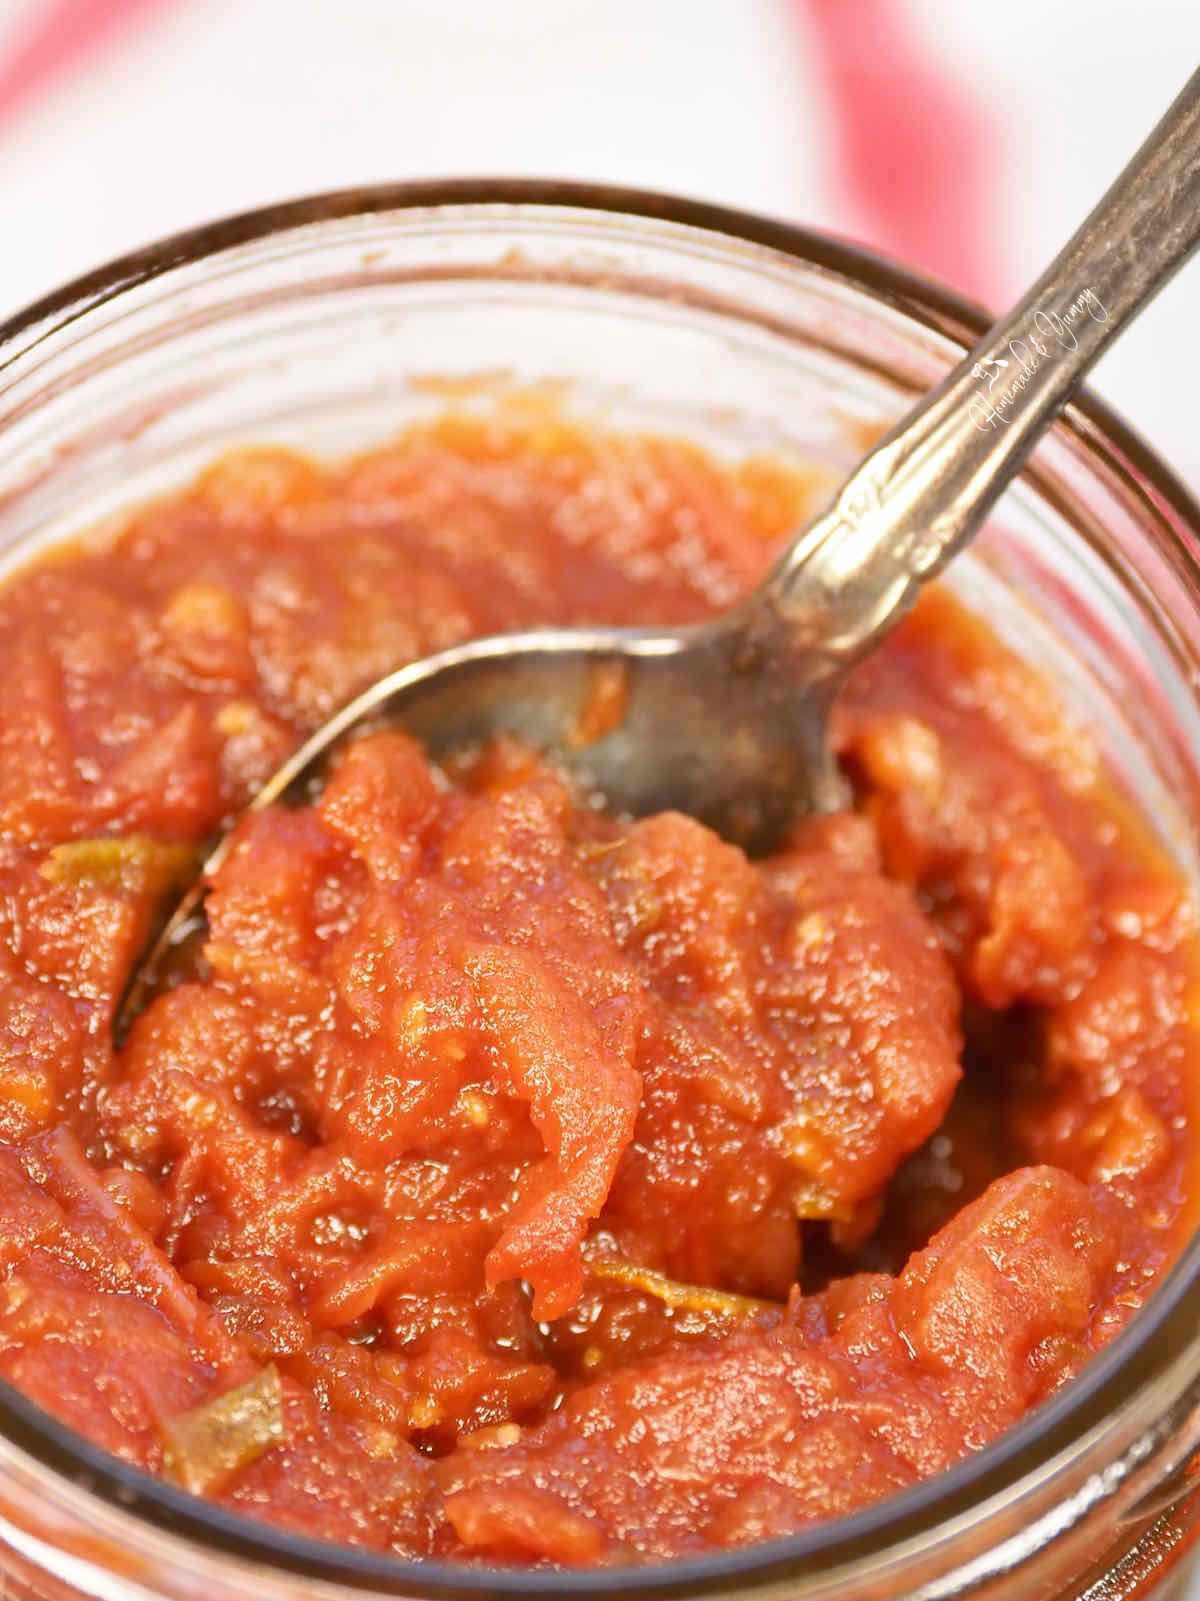 A spoonful of homemade tomato preserves.